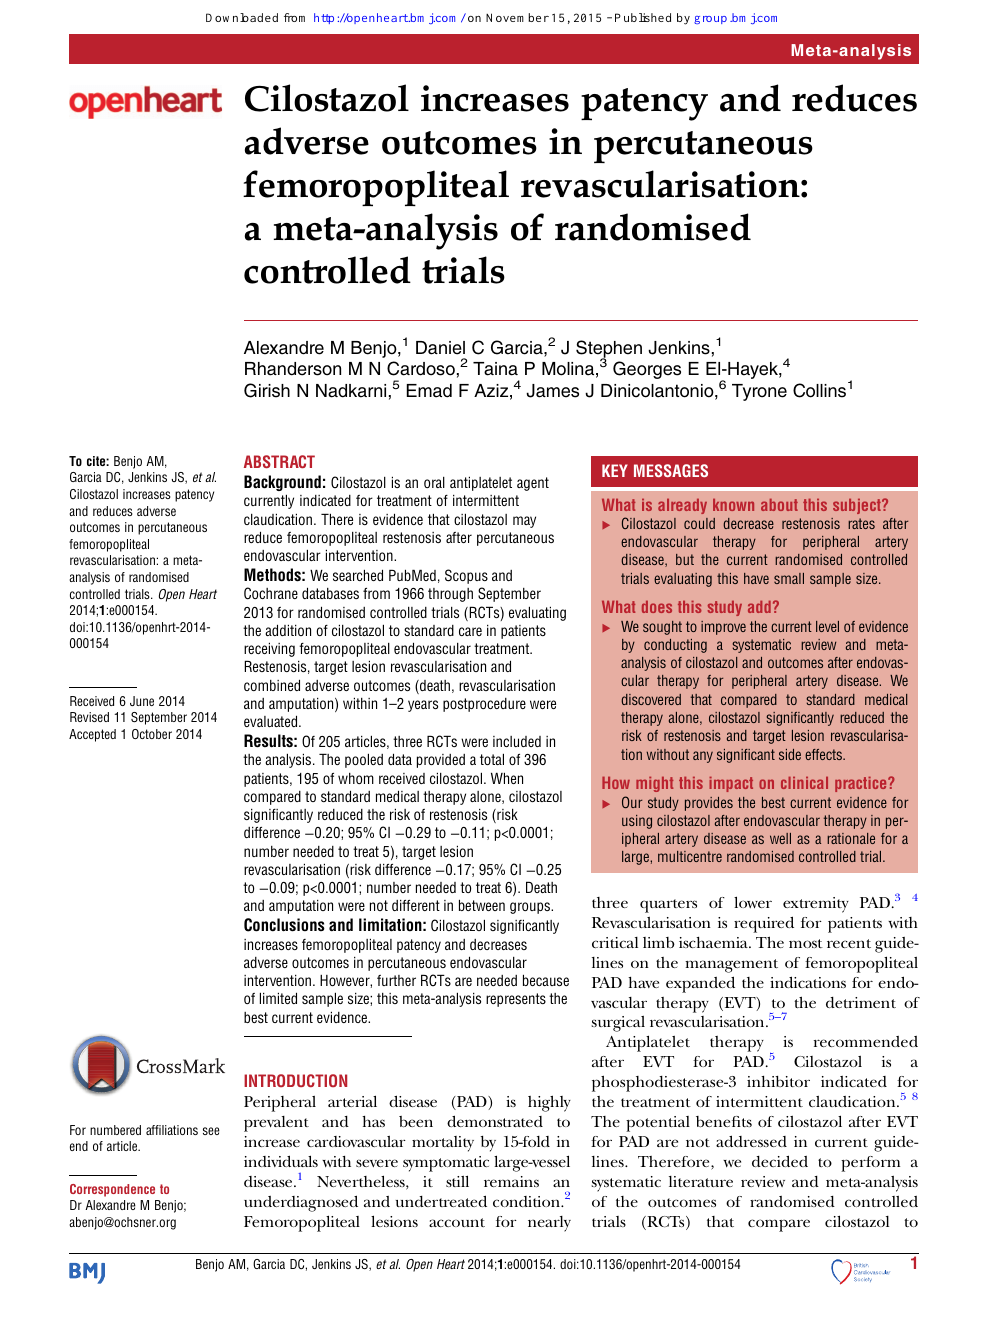 Cilostazol Increases Patency And Reduces Adverse Outcomes In Percutaneous Femoropopliteal Revascularisation A Meta Analysis Of Randomised Controlled Trials Topic Of Research Paper In Clinical Medicine Download Scholarly Article Pdf And Read For